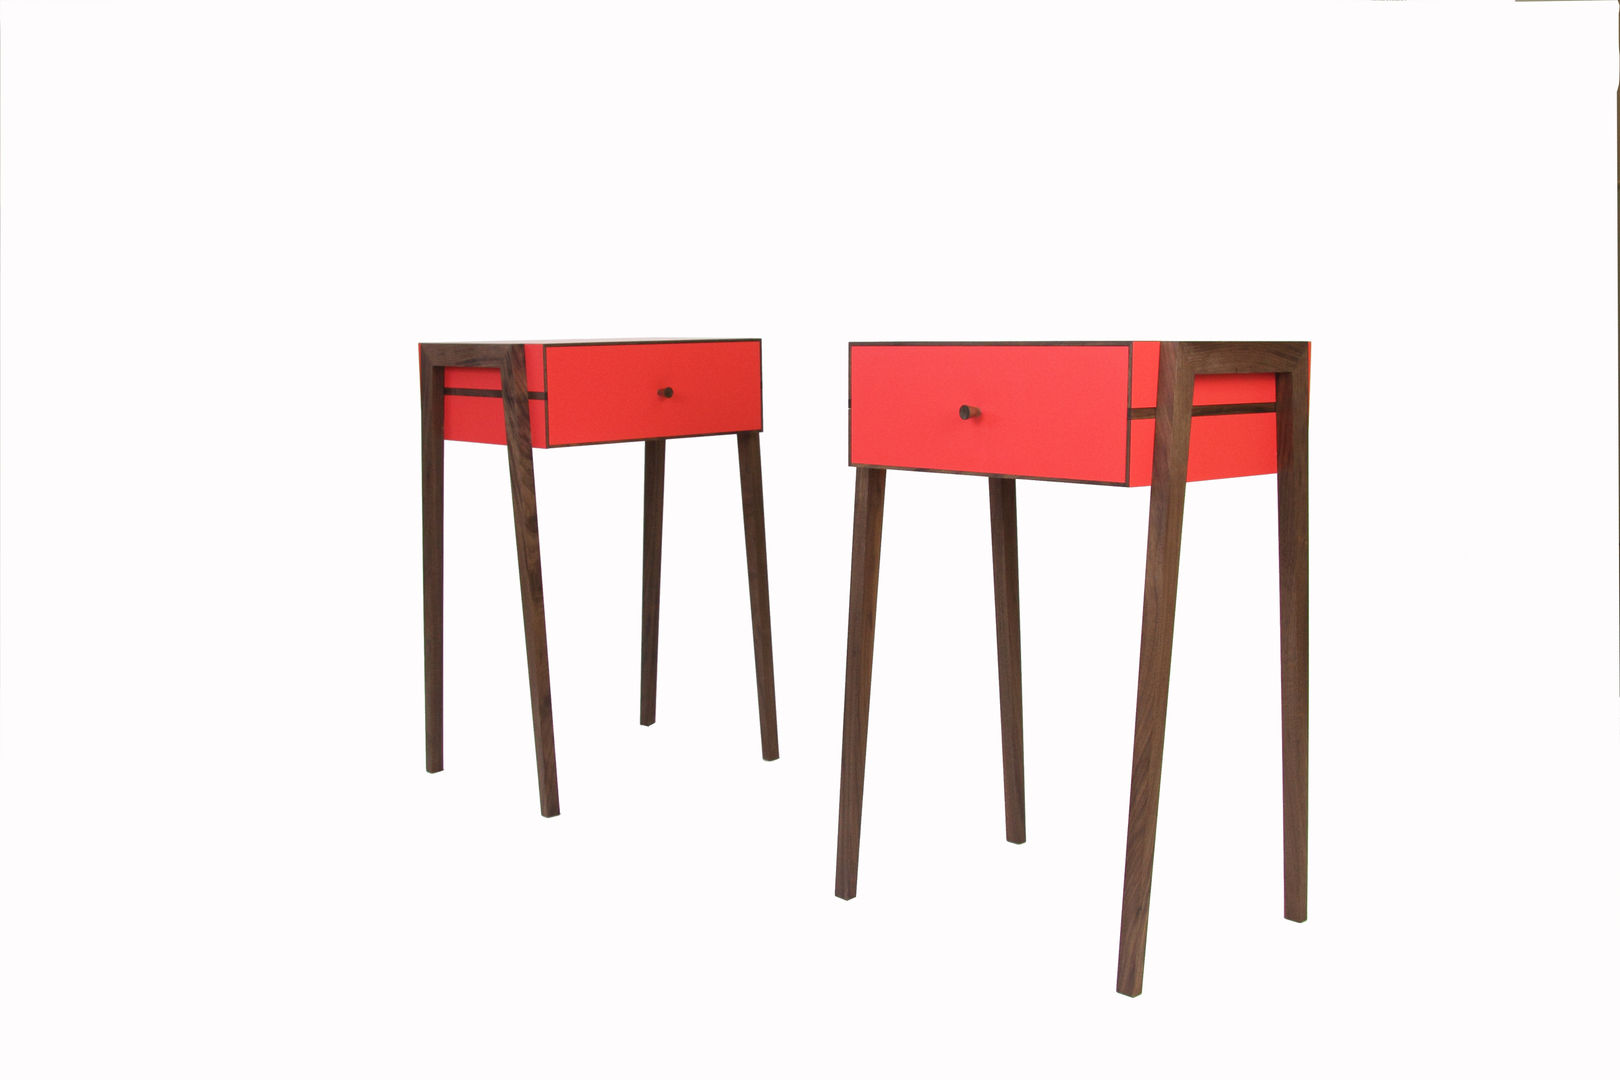 Animate Bedside Table in Red Formica and Walnut Young & Norgate Chambre moderne Tables de nuit